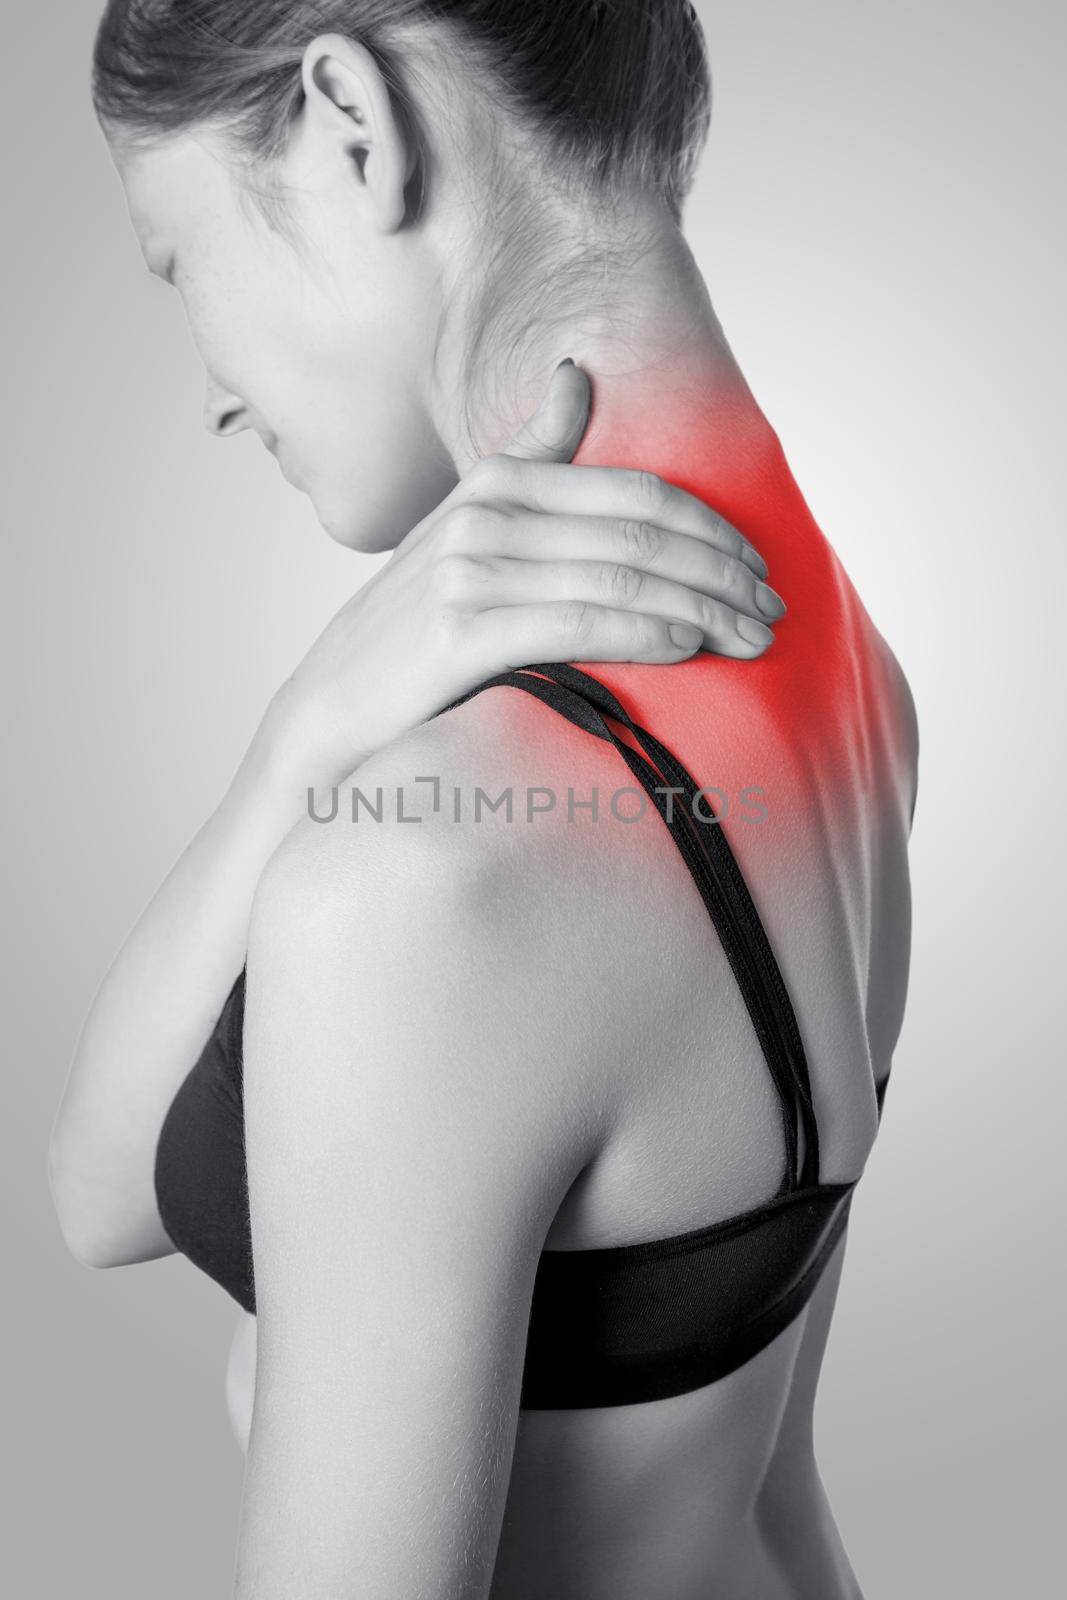 Closeup view of a young woman with shoulder or neck pain on gray background. Black and white photo with red dot